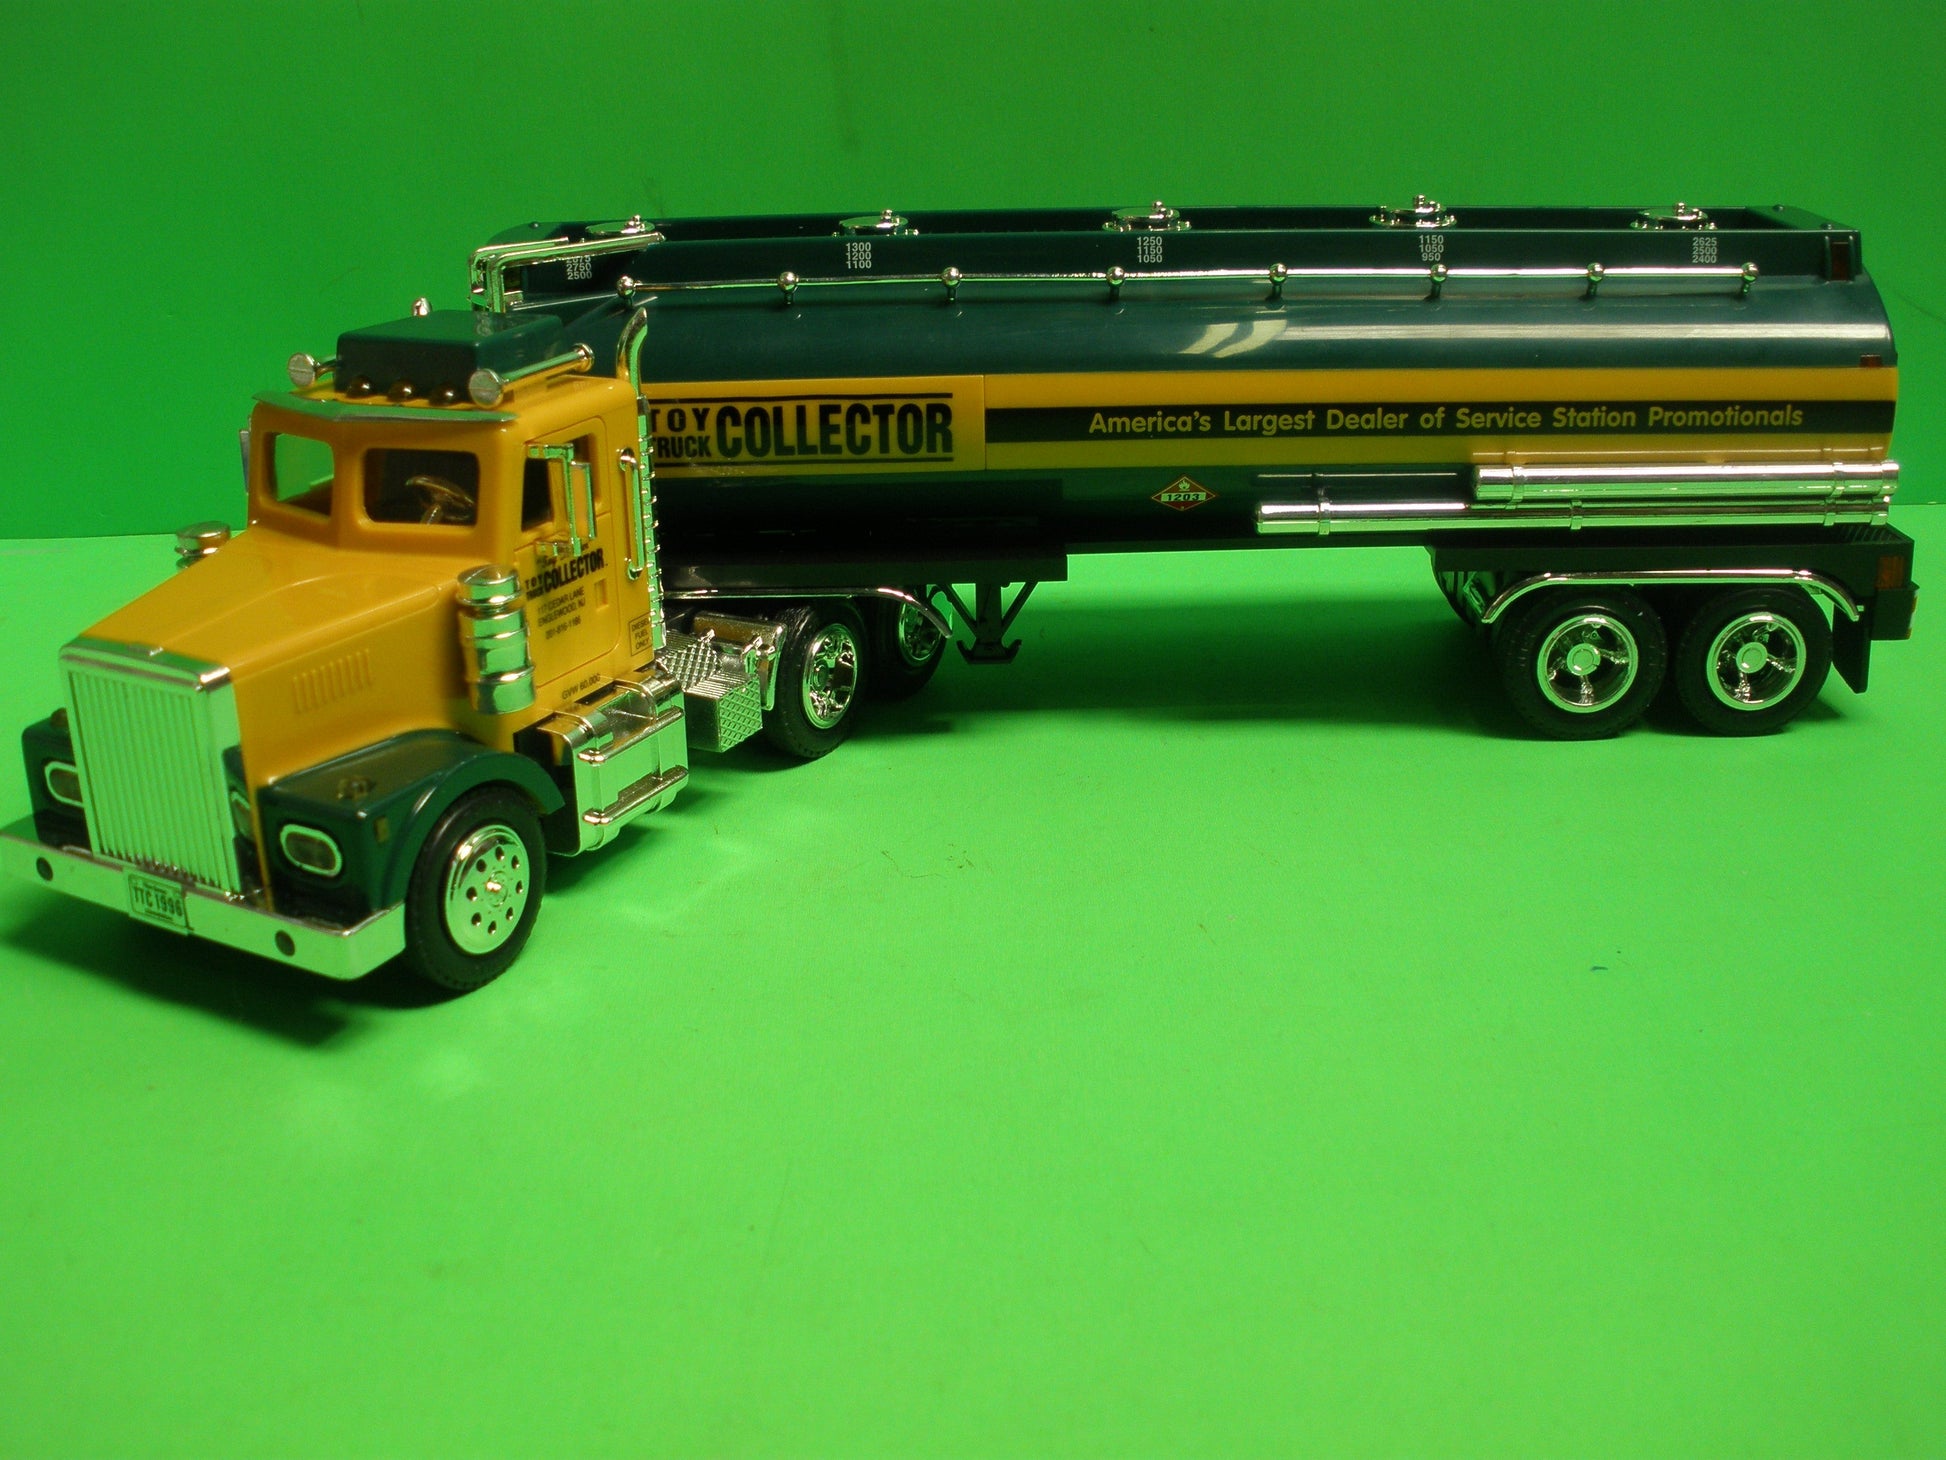 Toy Truck Collector Tanker Truck